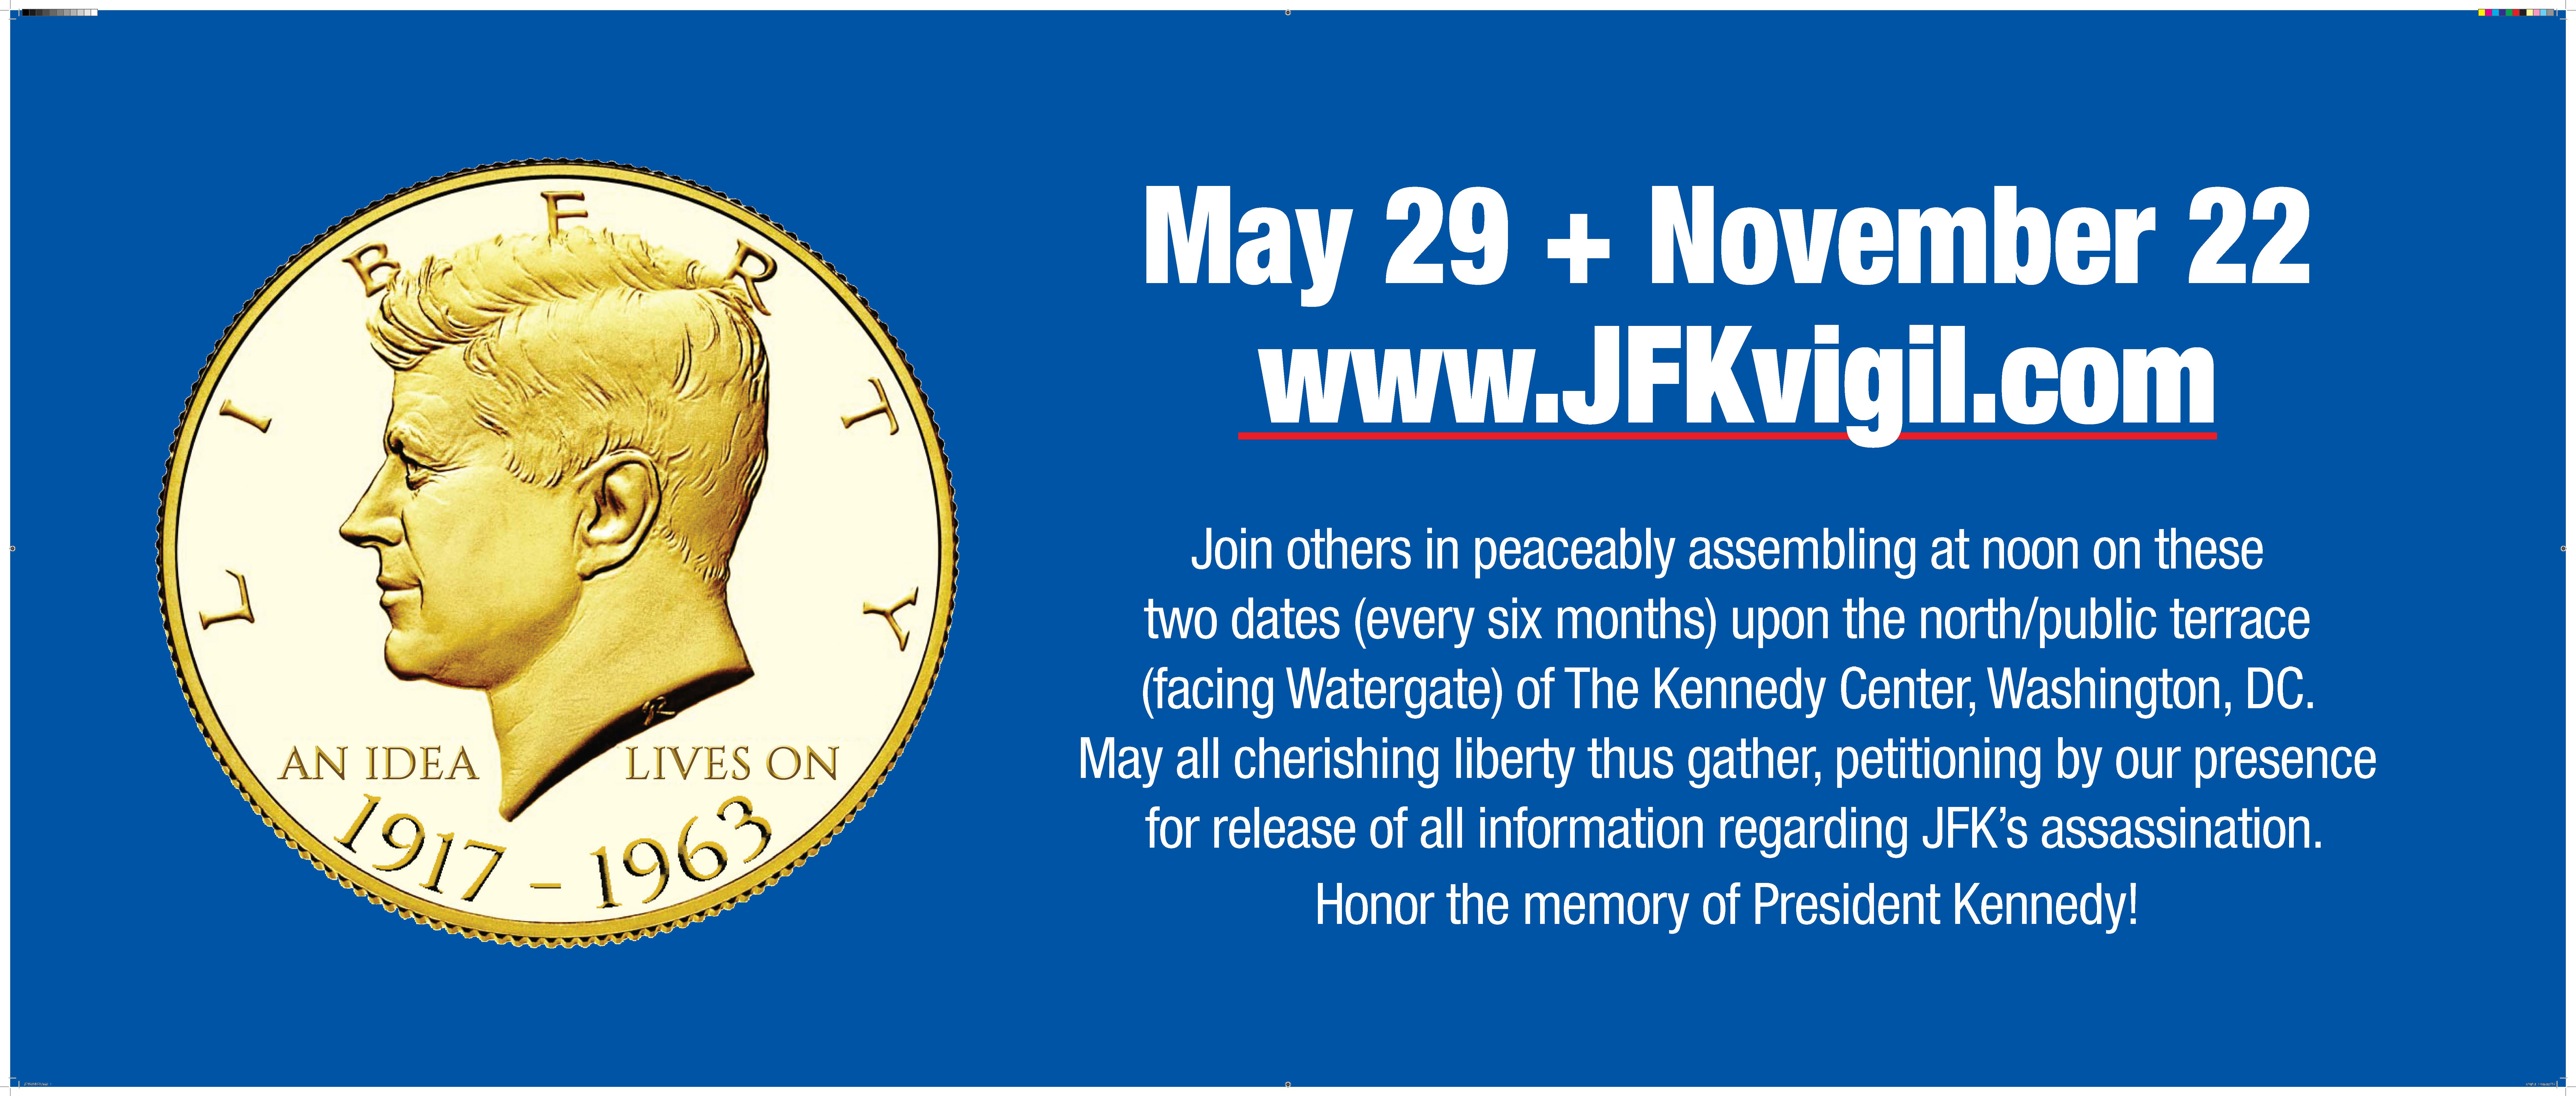 Banner of www.JFKvigil.com to be displayed during the assembly